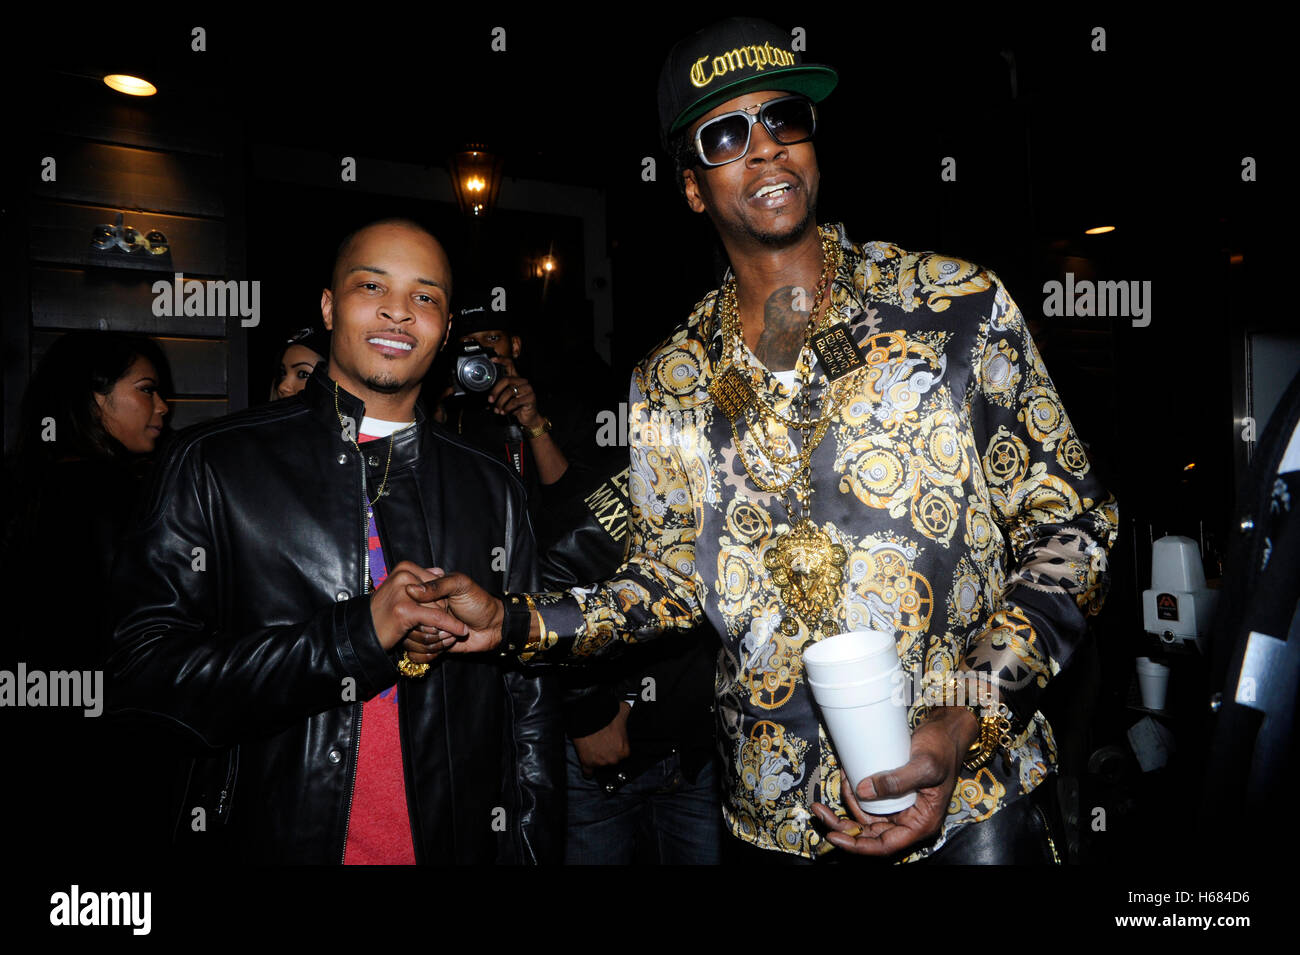 (L-R) EXCLUSIVE: Rappers T.I. and 2 Chainz attends Young Jeezy and 2 Chainz 'RIP' Music Video at Greystone Manor on February 11, 2013 in Los Angeles, California. Stock Photo